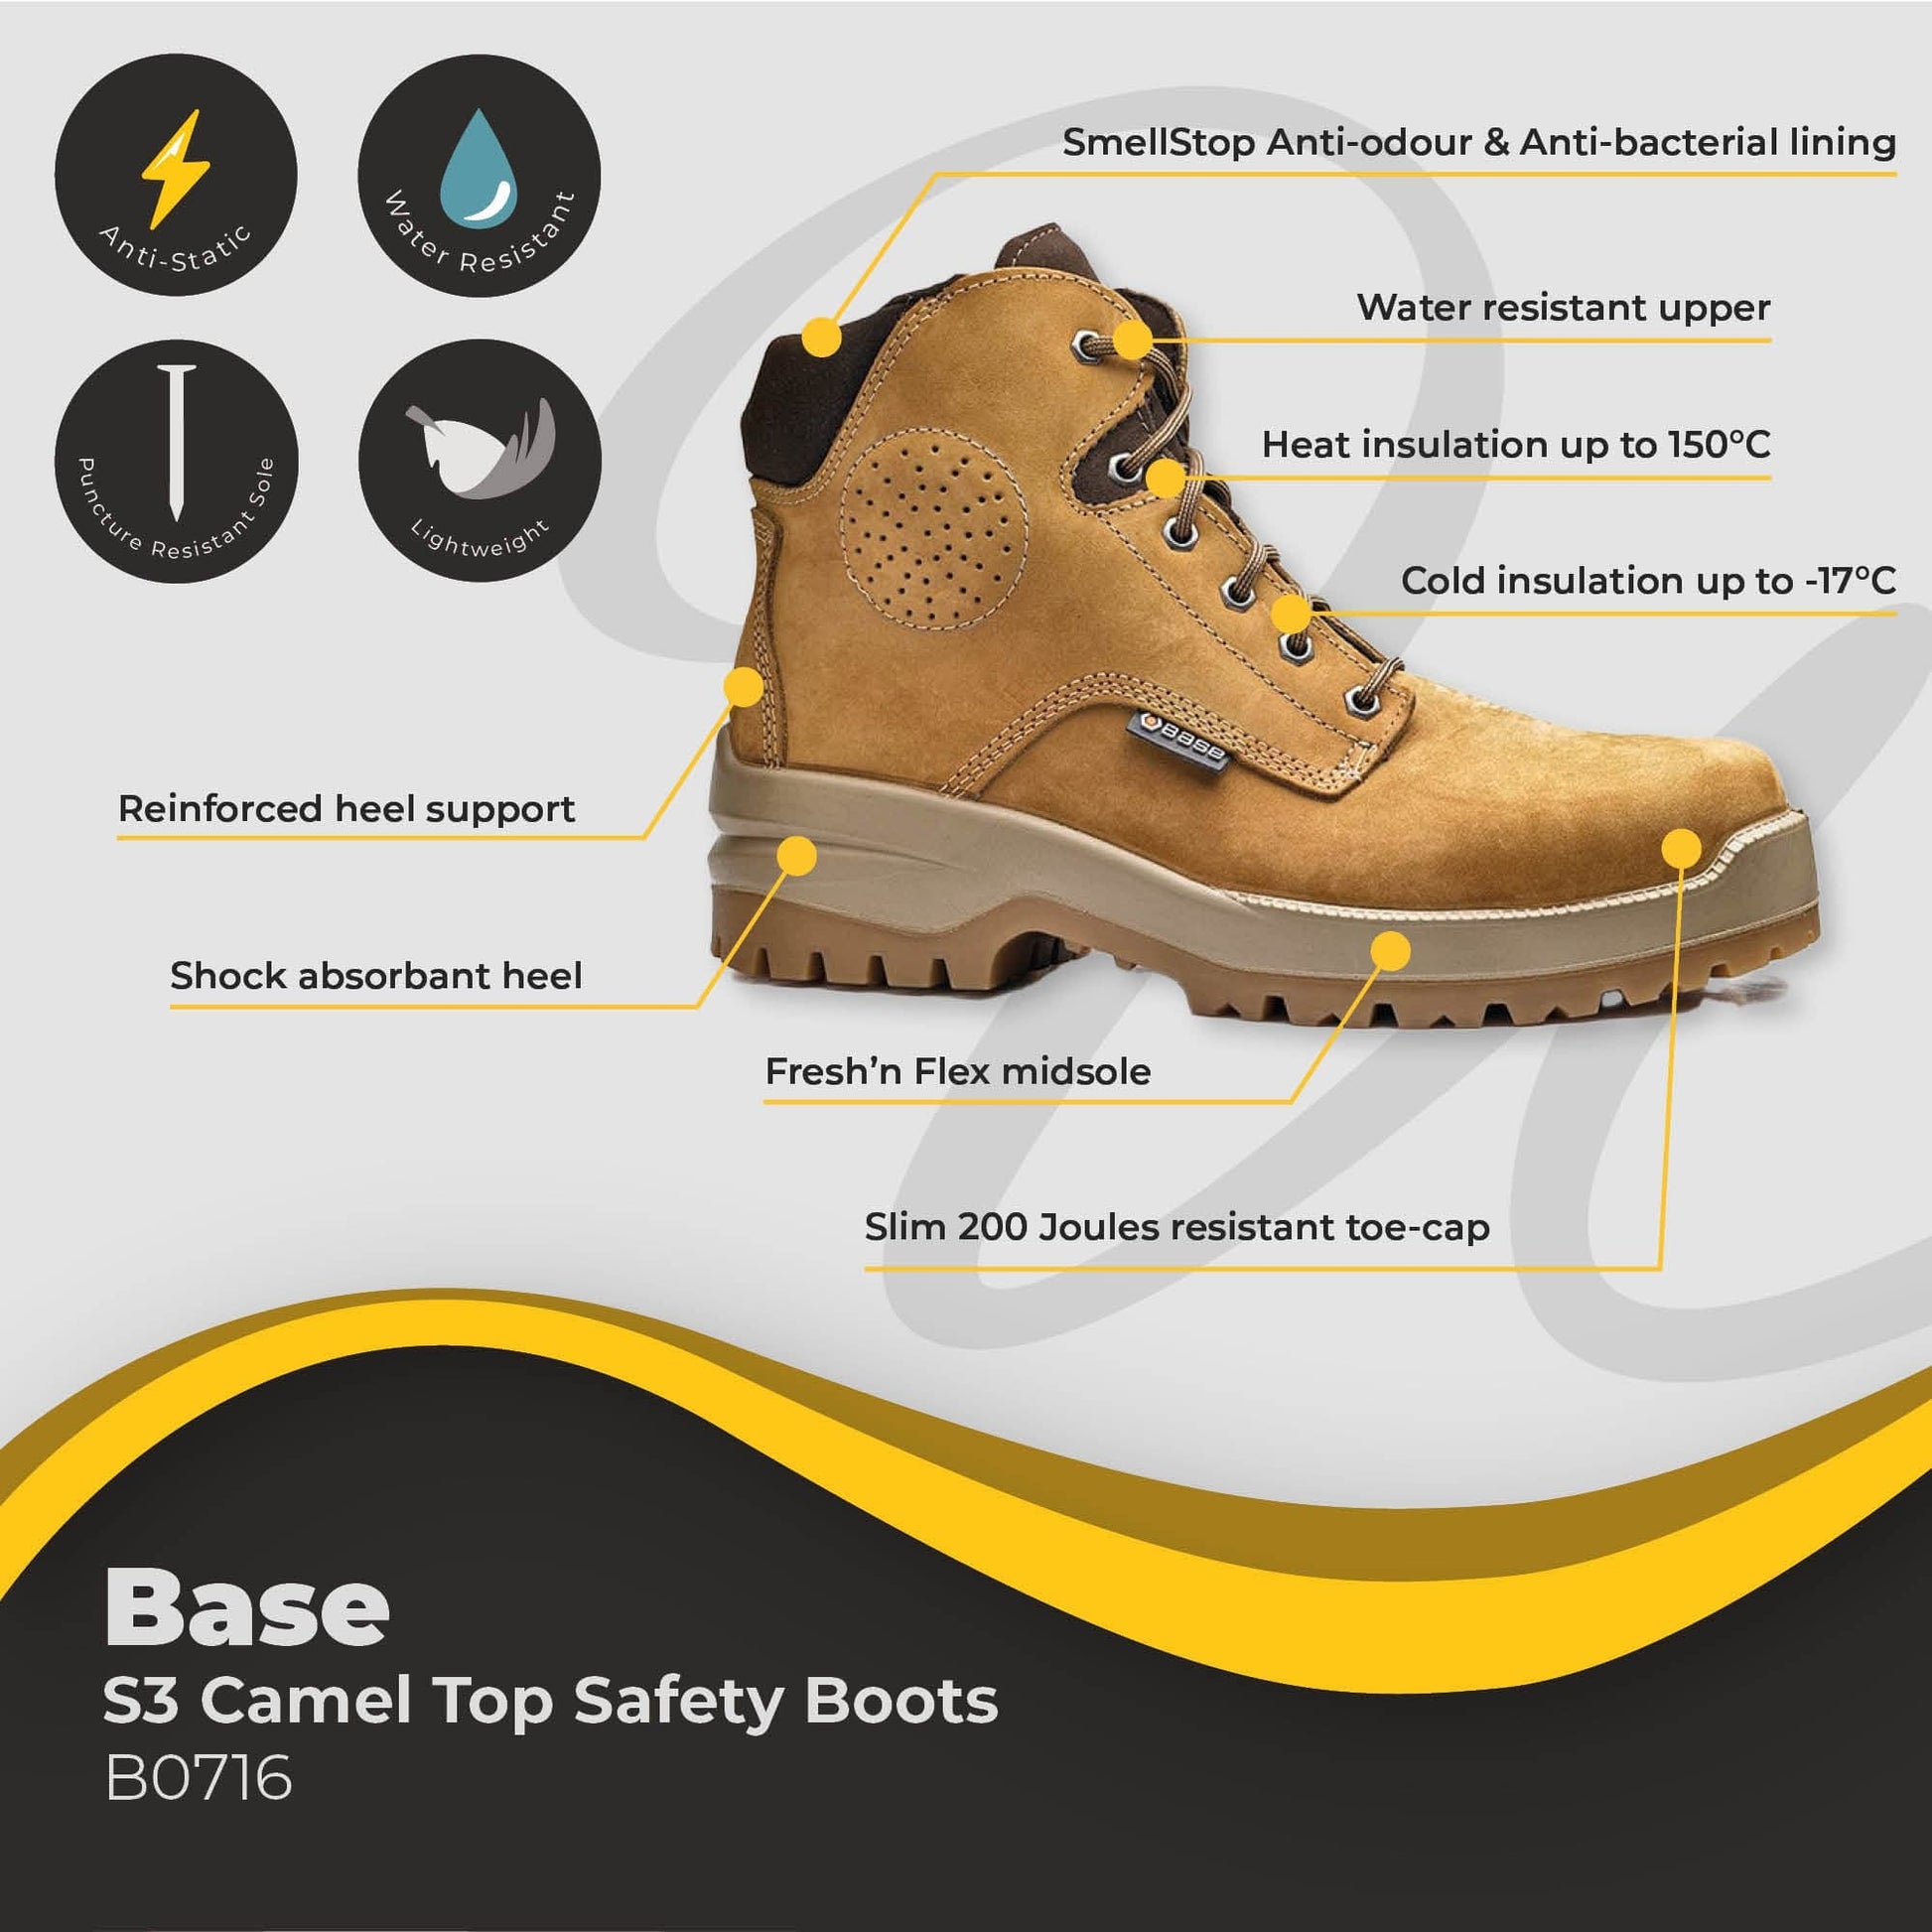 base camel top s3 safety boots b0716 di0716 06